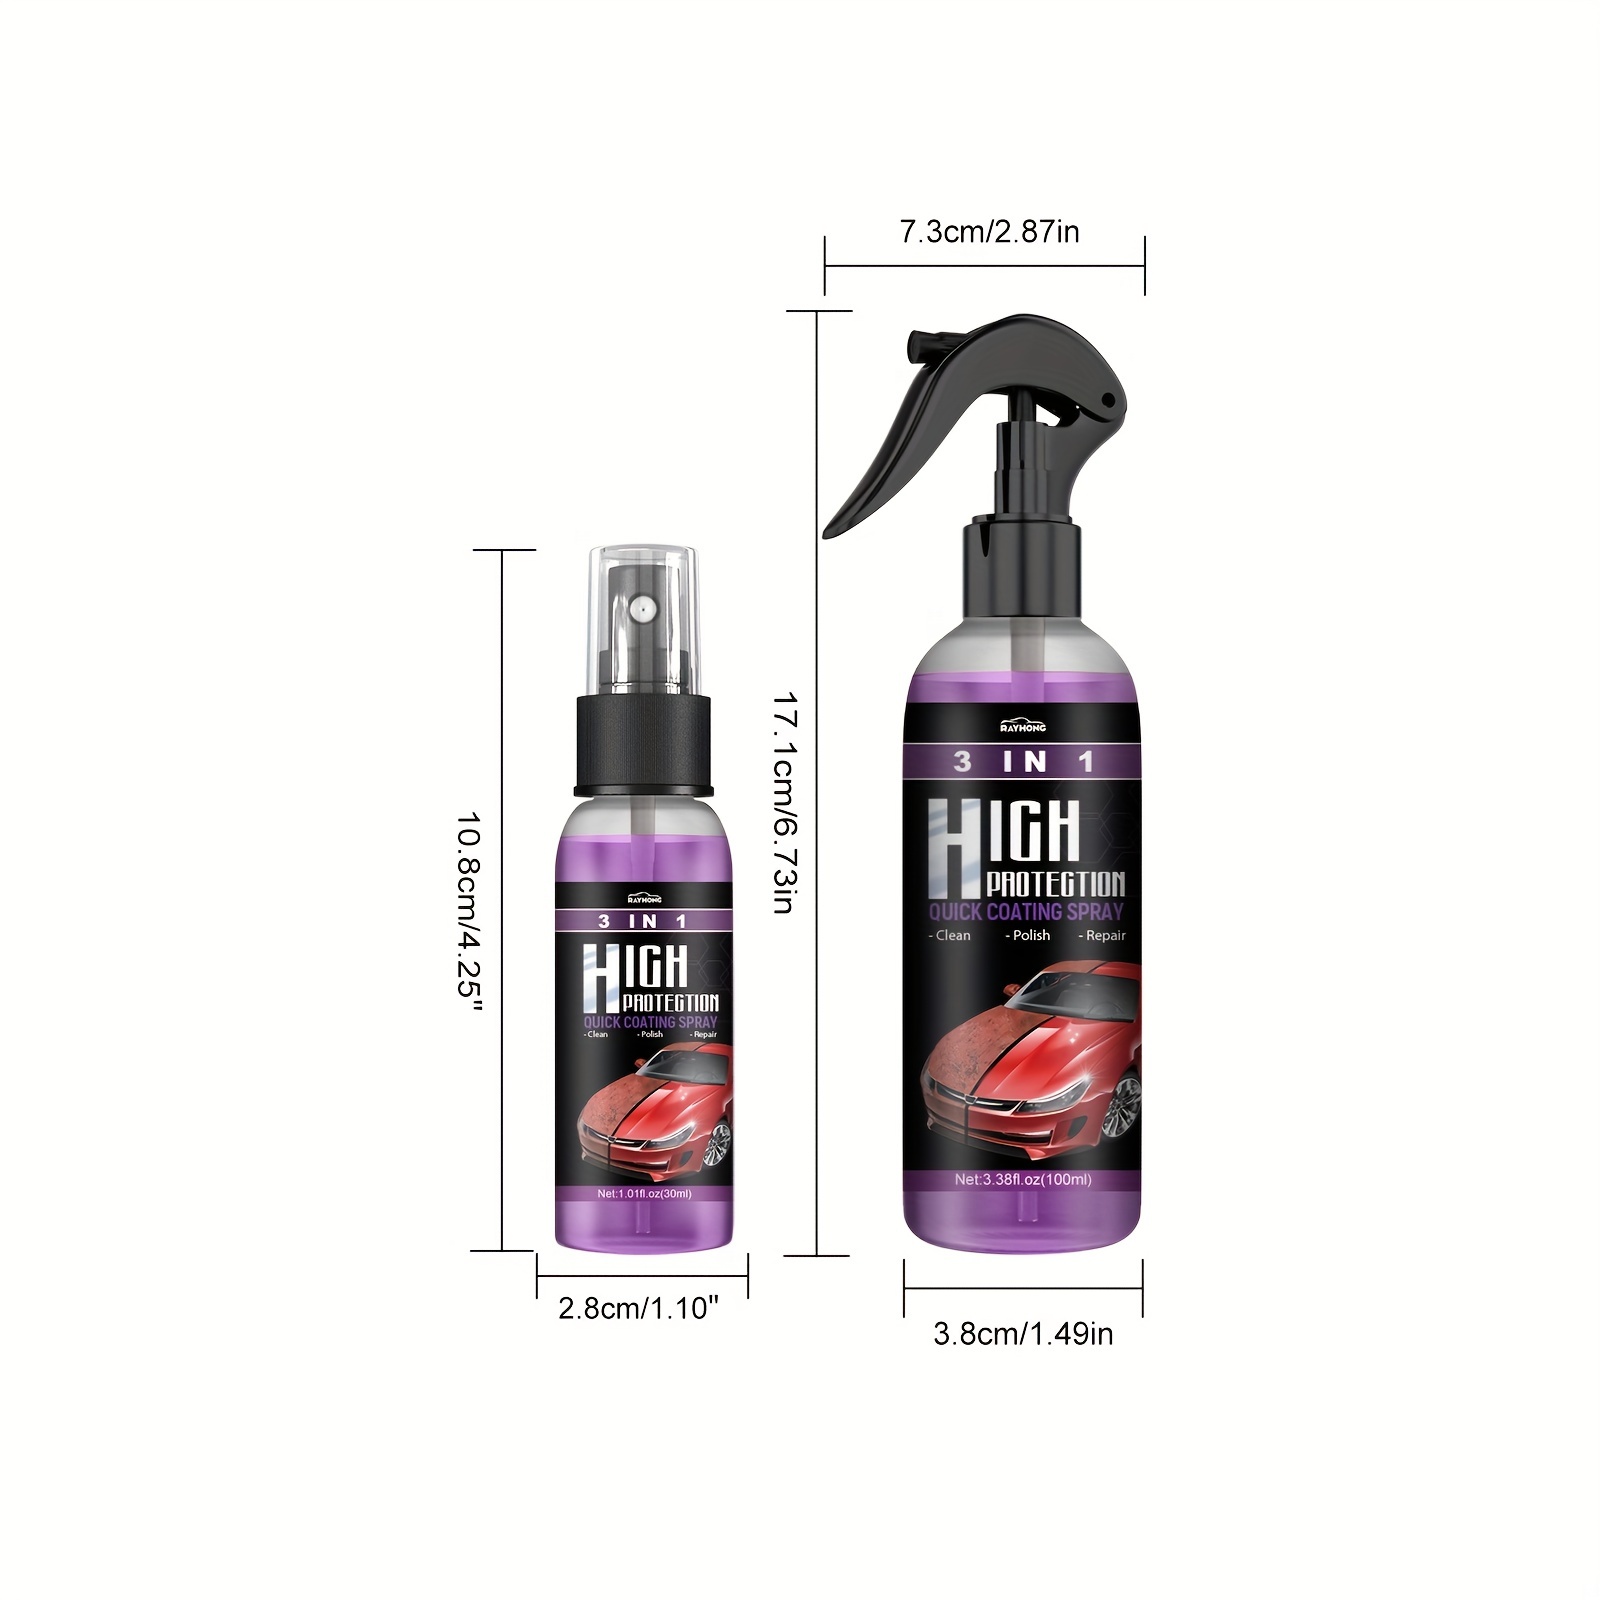  3 in 1 High Protection Quick Car Coating Spray, High Protection  3 in 1 Spray, 3 in 1 Ceramic Car Coating Spray, Quick Coat Car Wax Polish  Spray for Cars, Easy